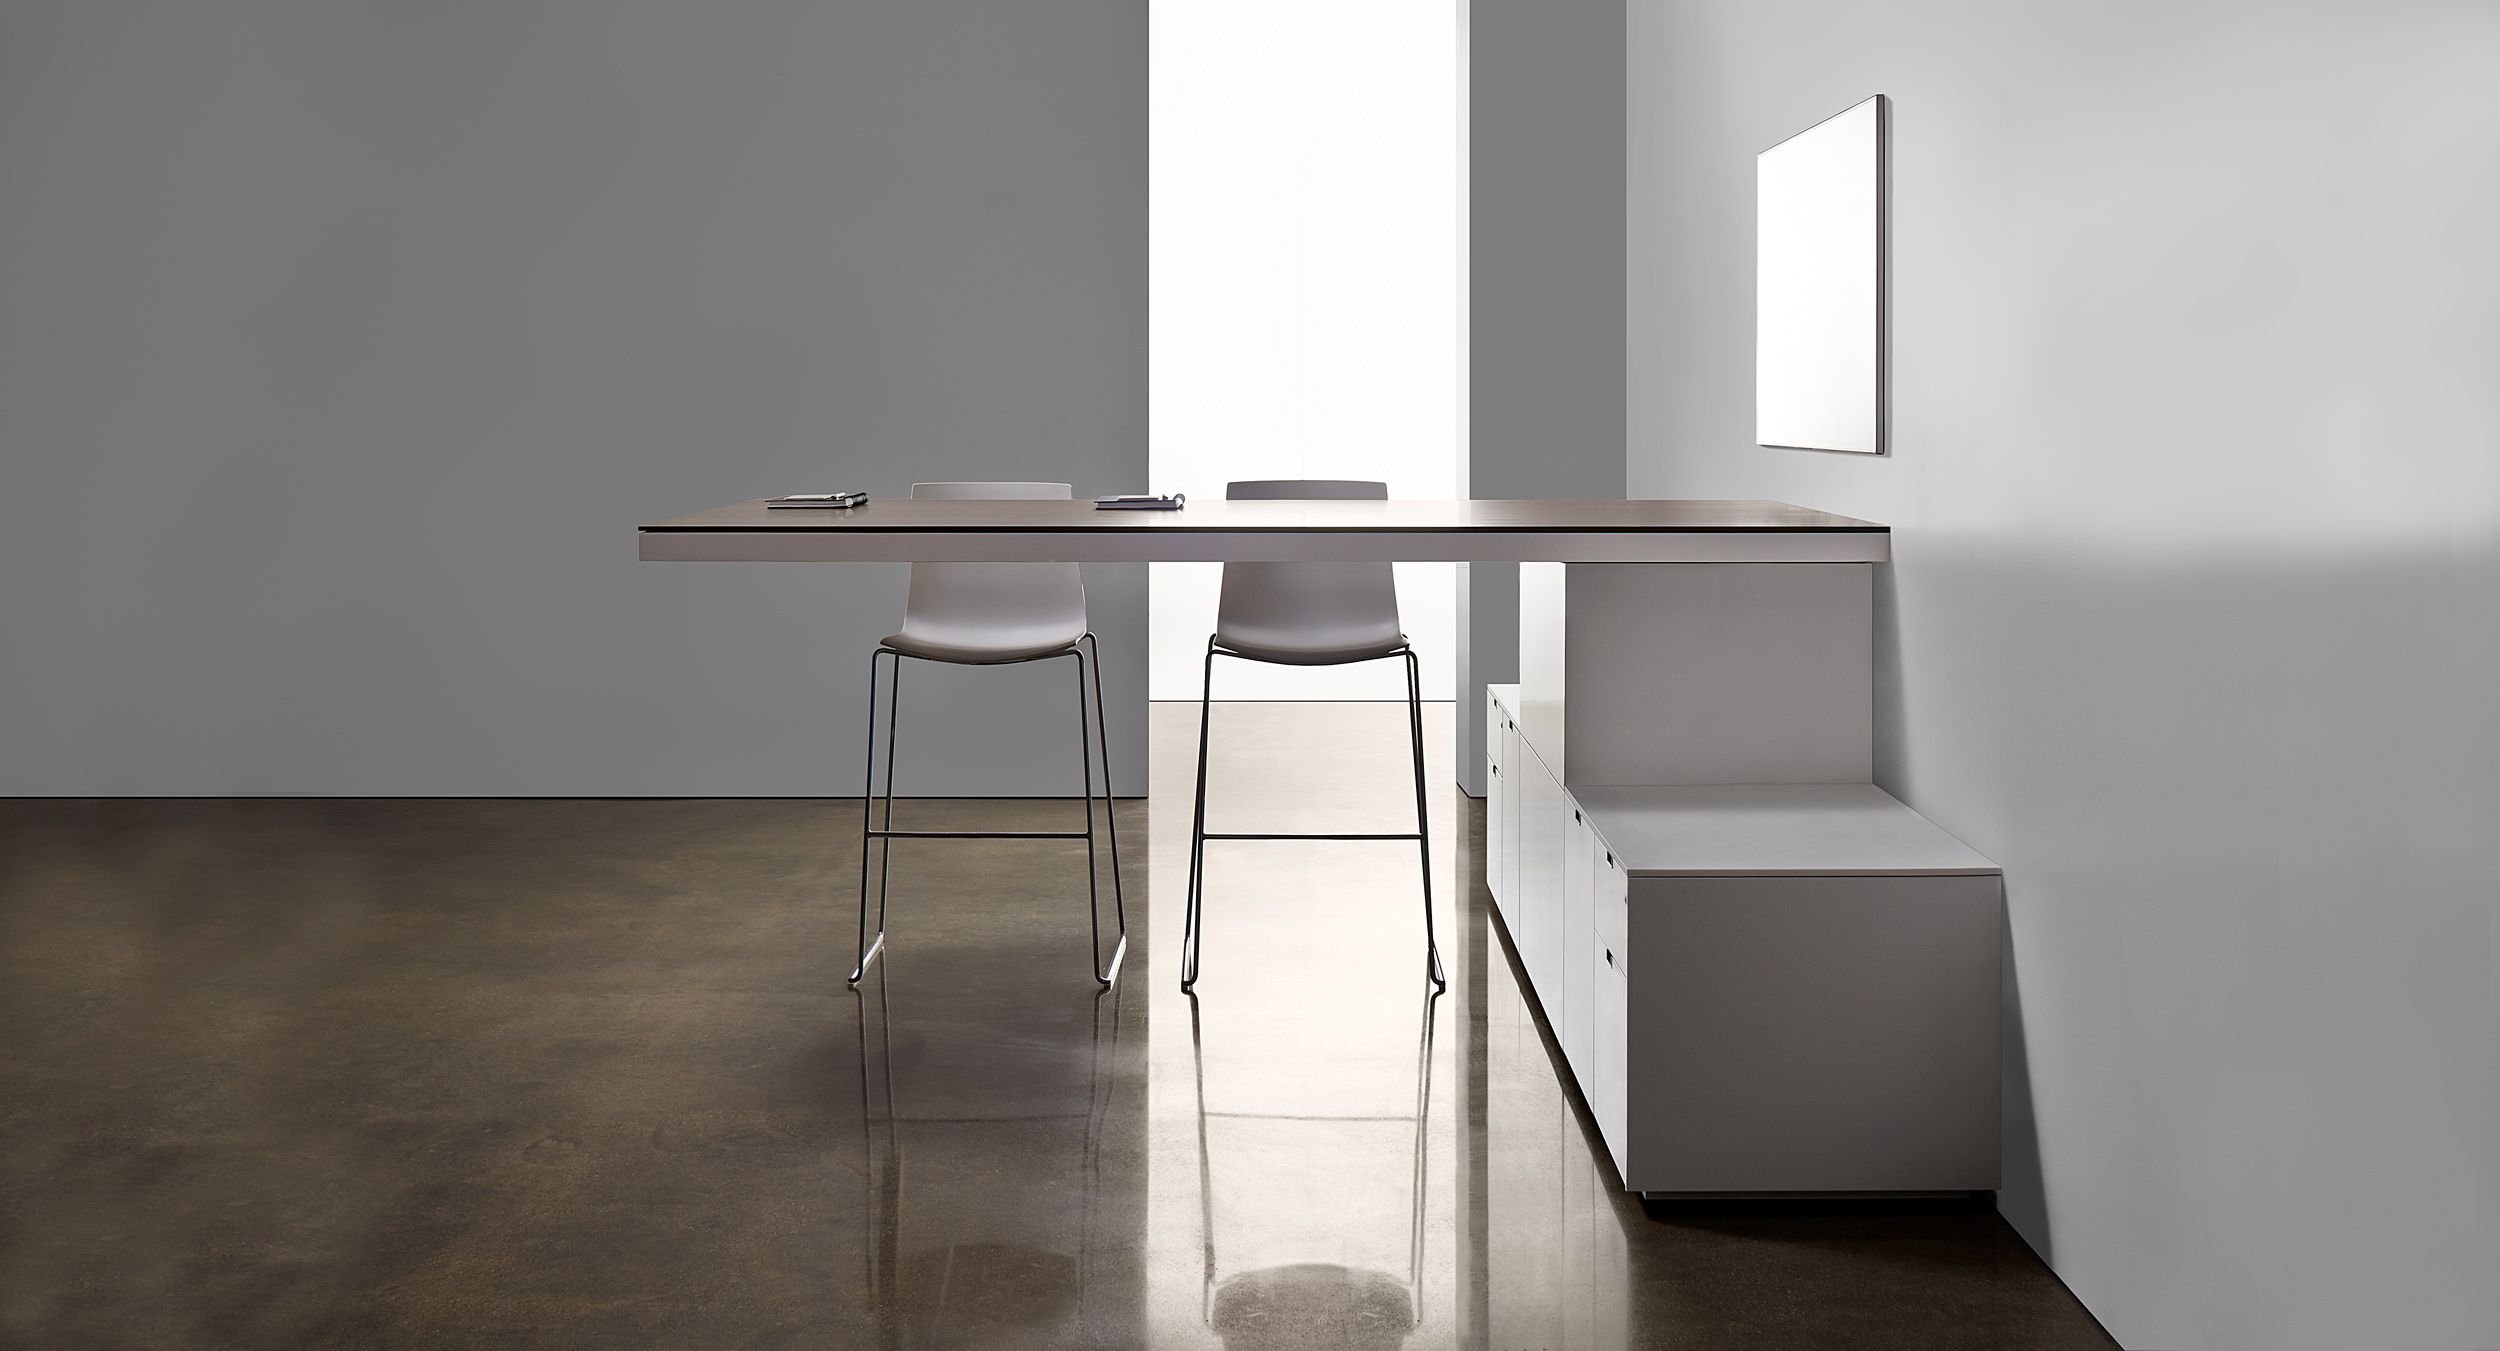 Defy gravity with a free-floating, cantilevered standing-height table.